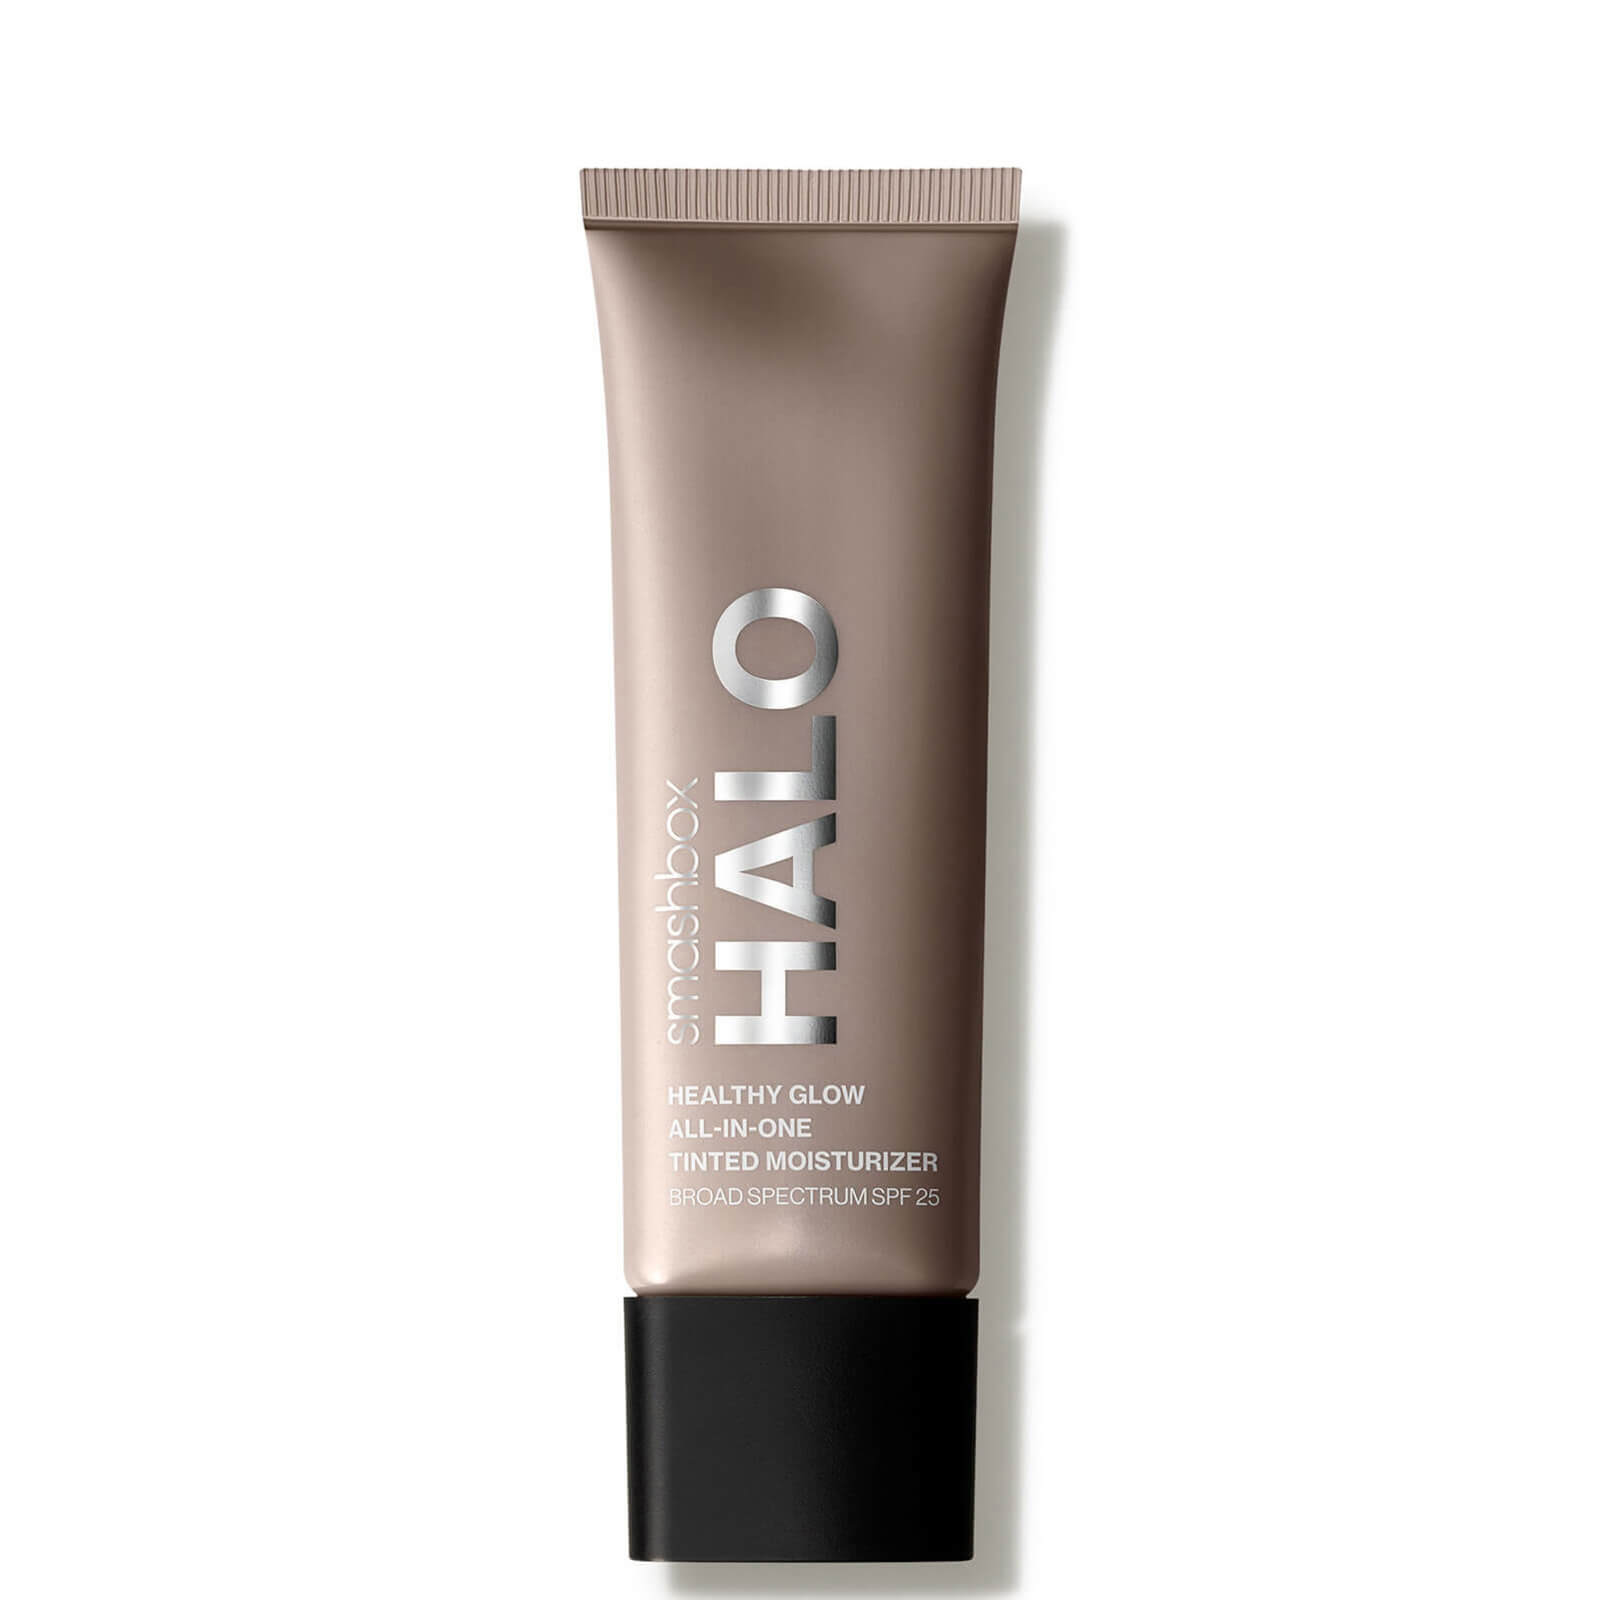 Image of Smashbox Halo Healthy Glow All-in-One SPF25 Tinted Moisturiser 40ml (Various Shades) - Light Neutral